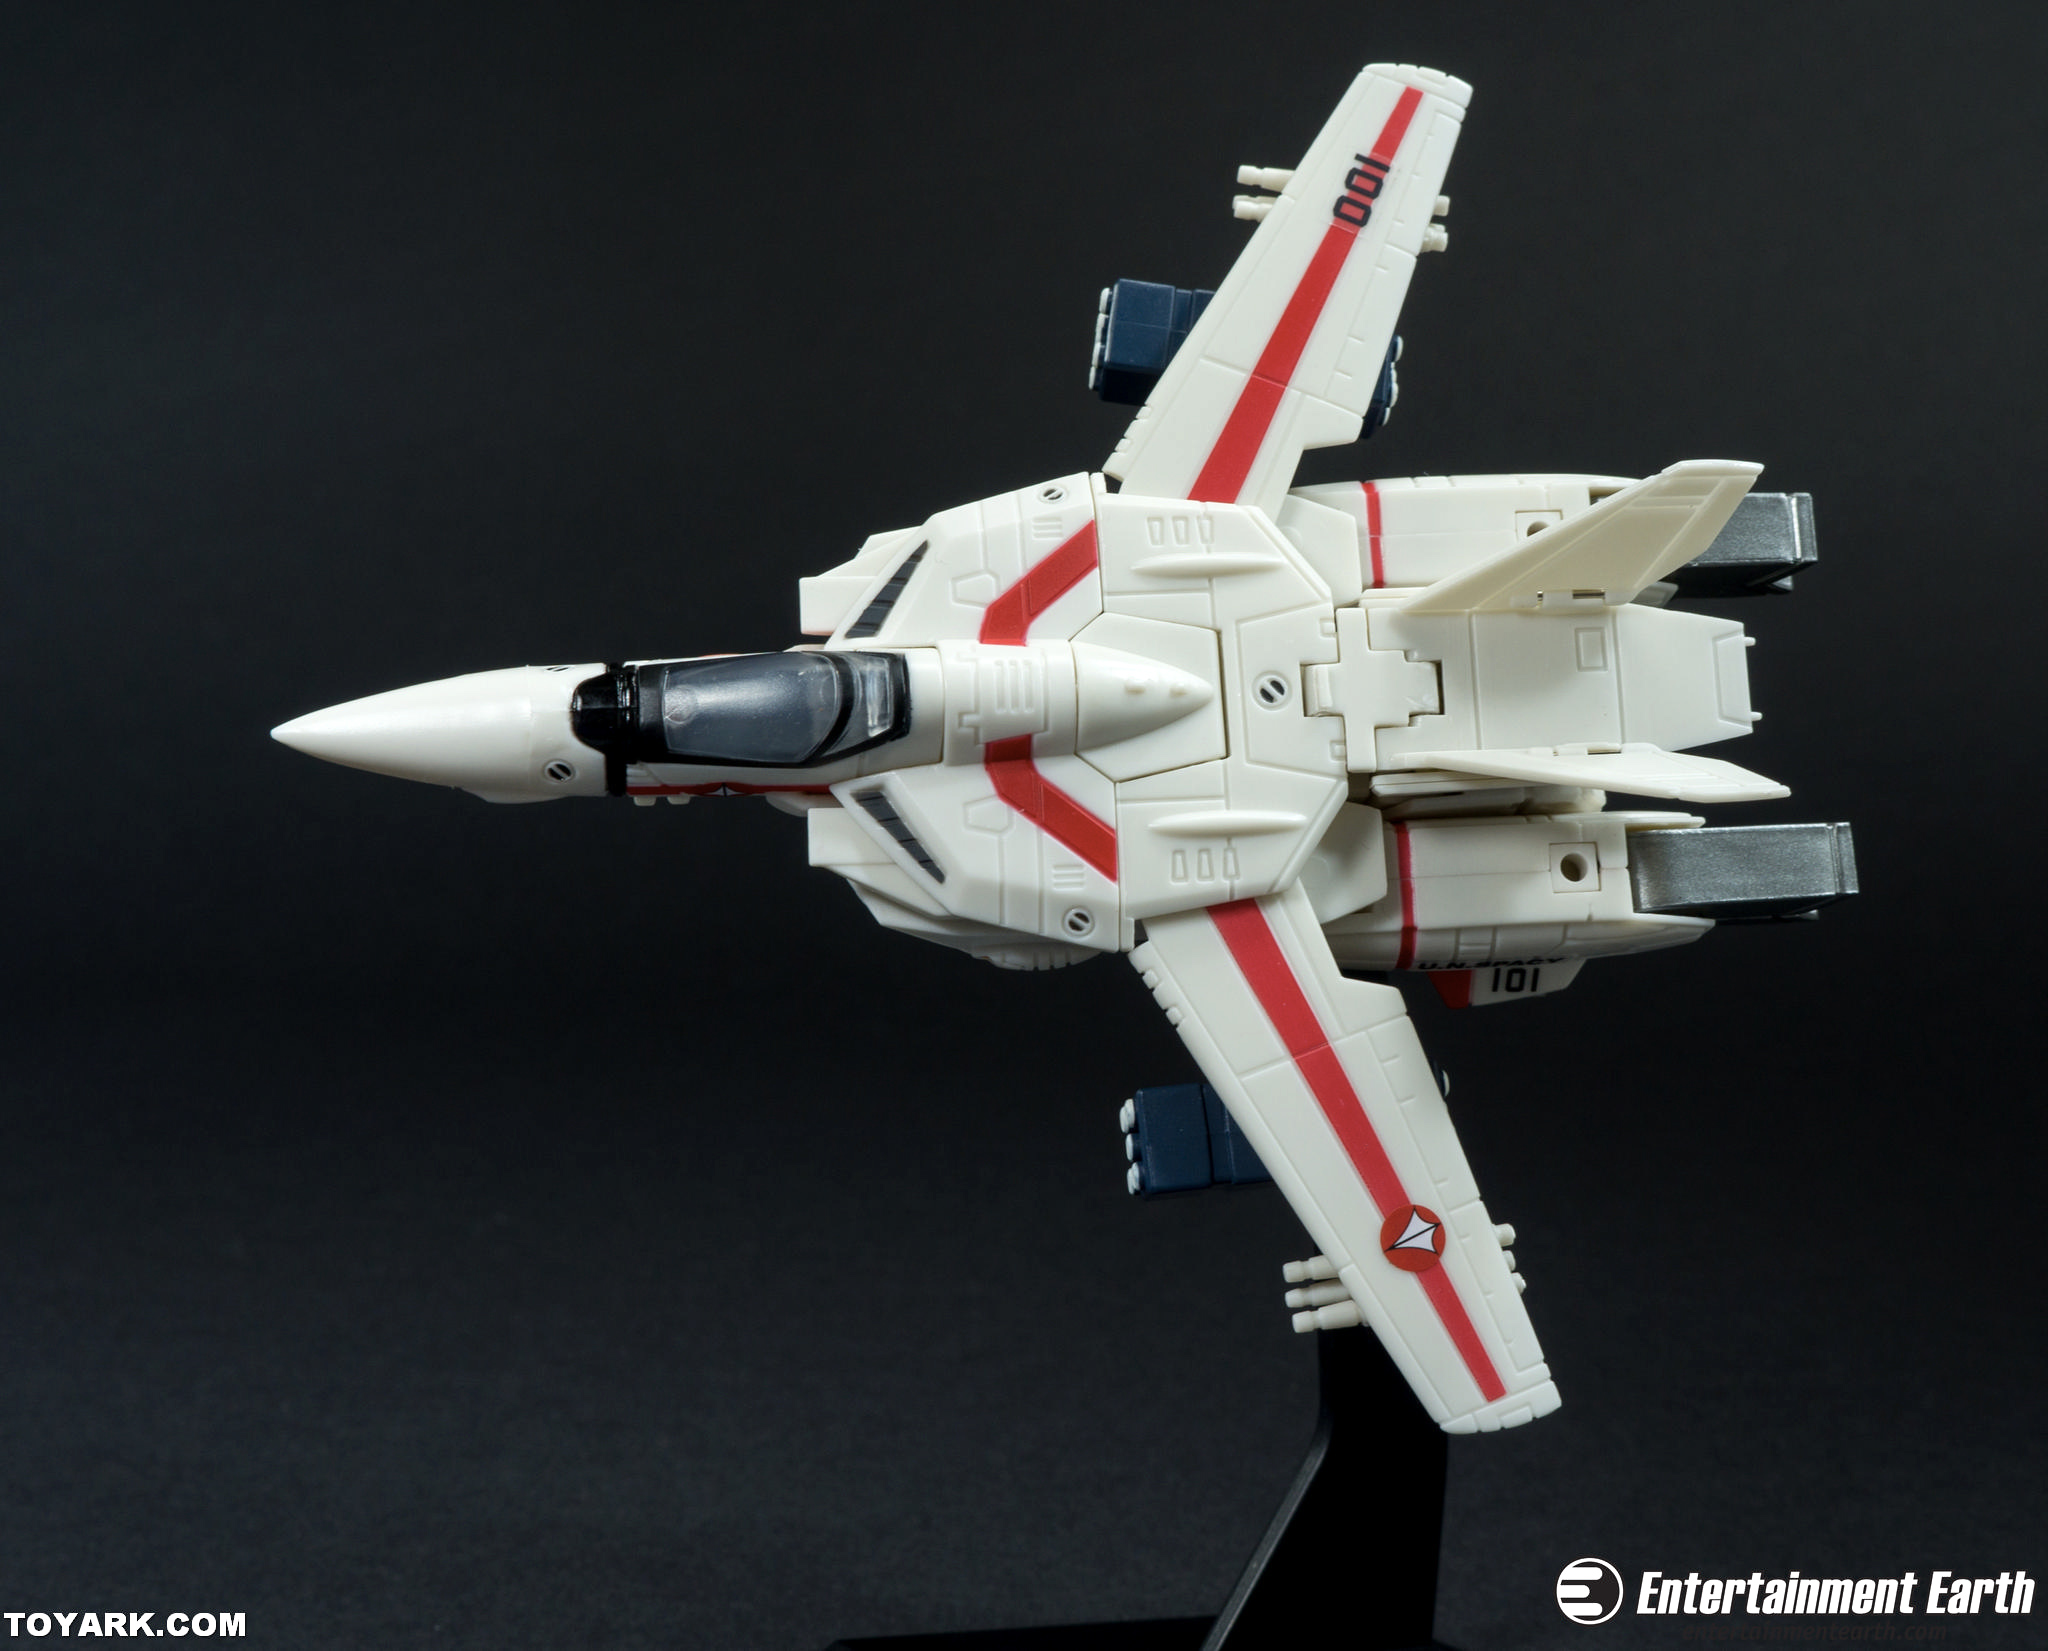 These 30th Anniversary Robotech Figures Are Pure Nostalgic Joy